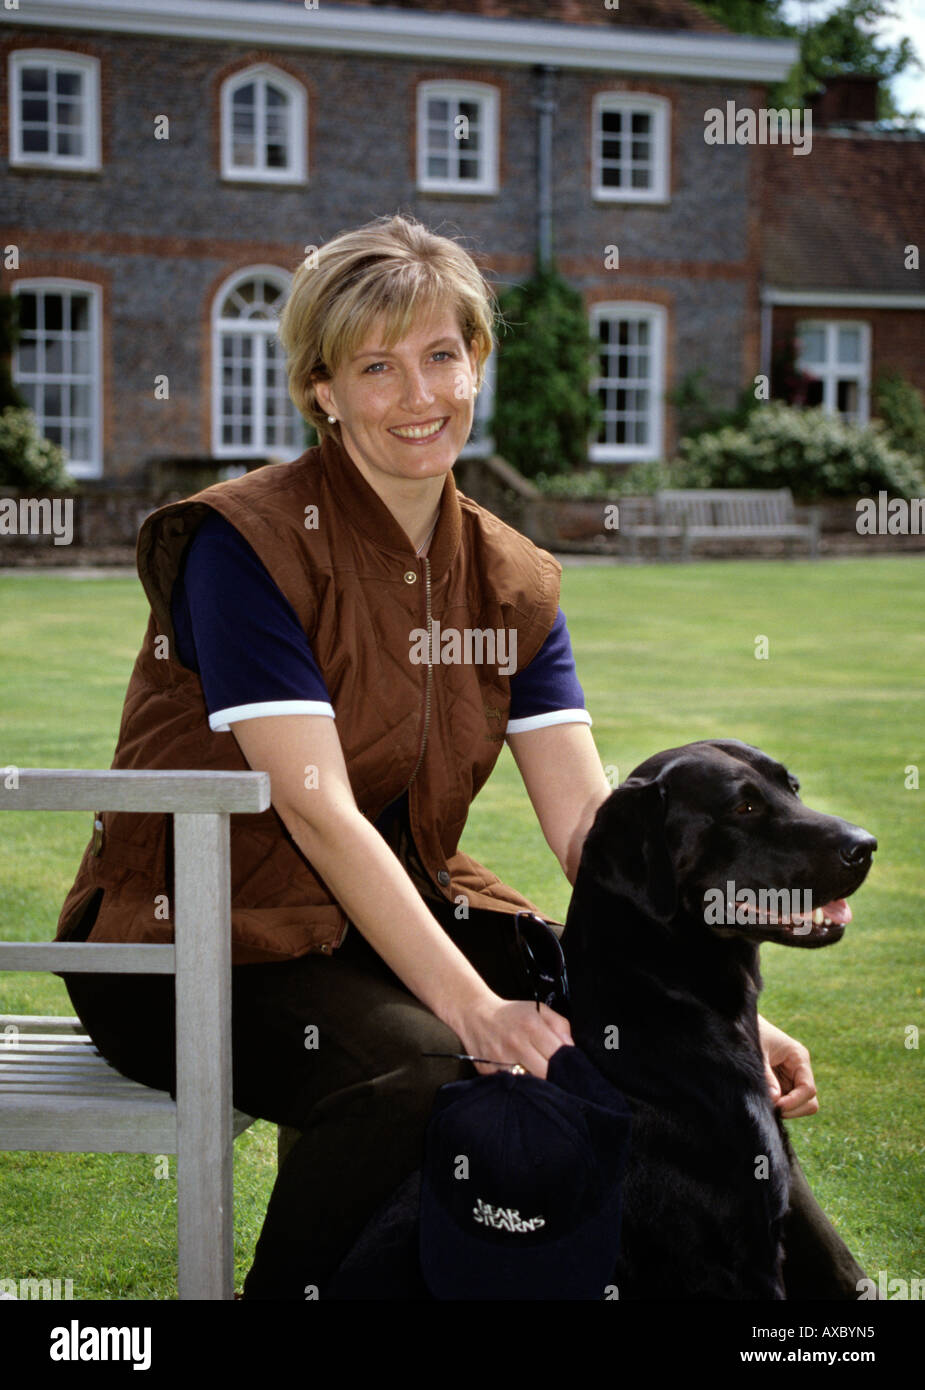 sophie-countess-of-wessex-seen-before-her-marriage-in-1999-photo-by-AXBYN5.jpg